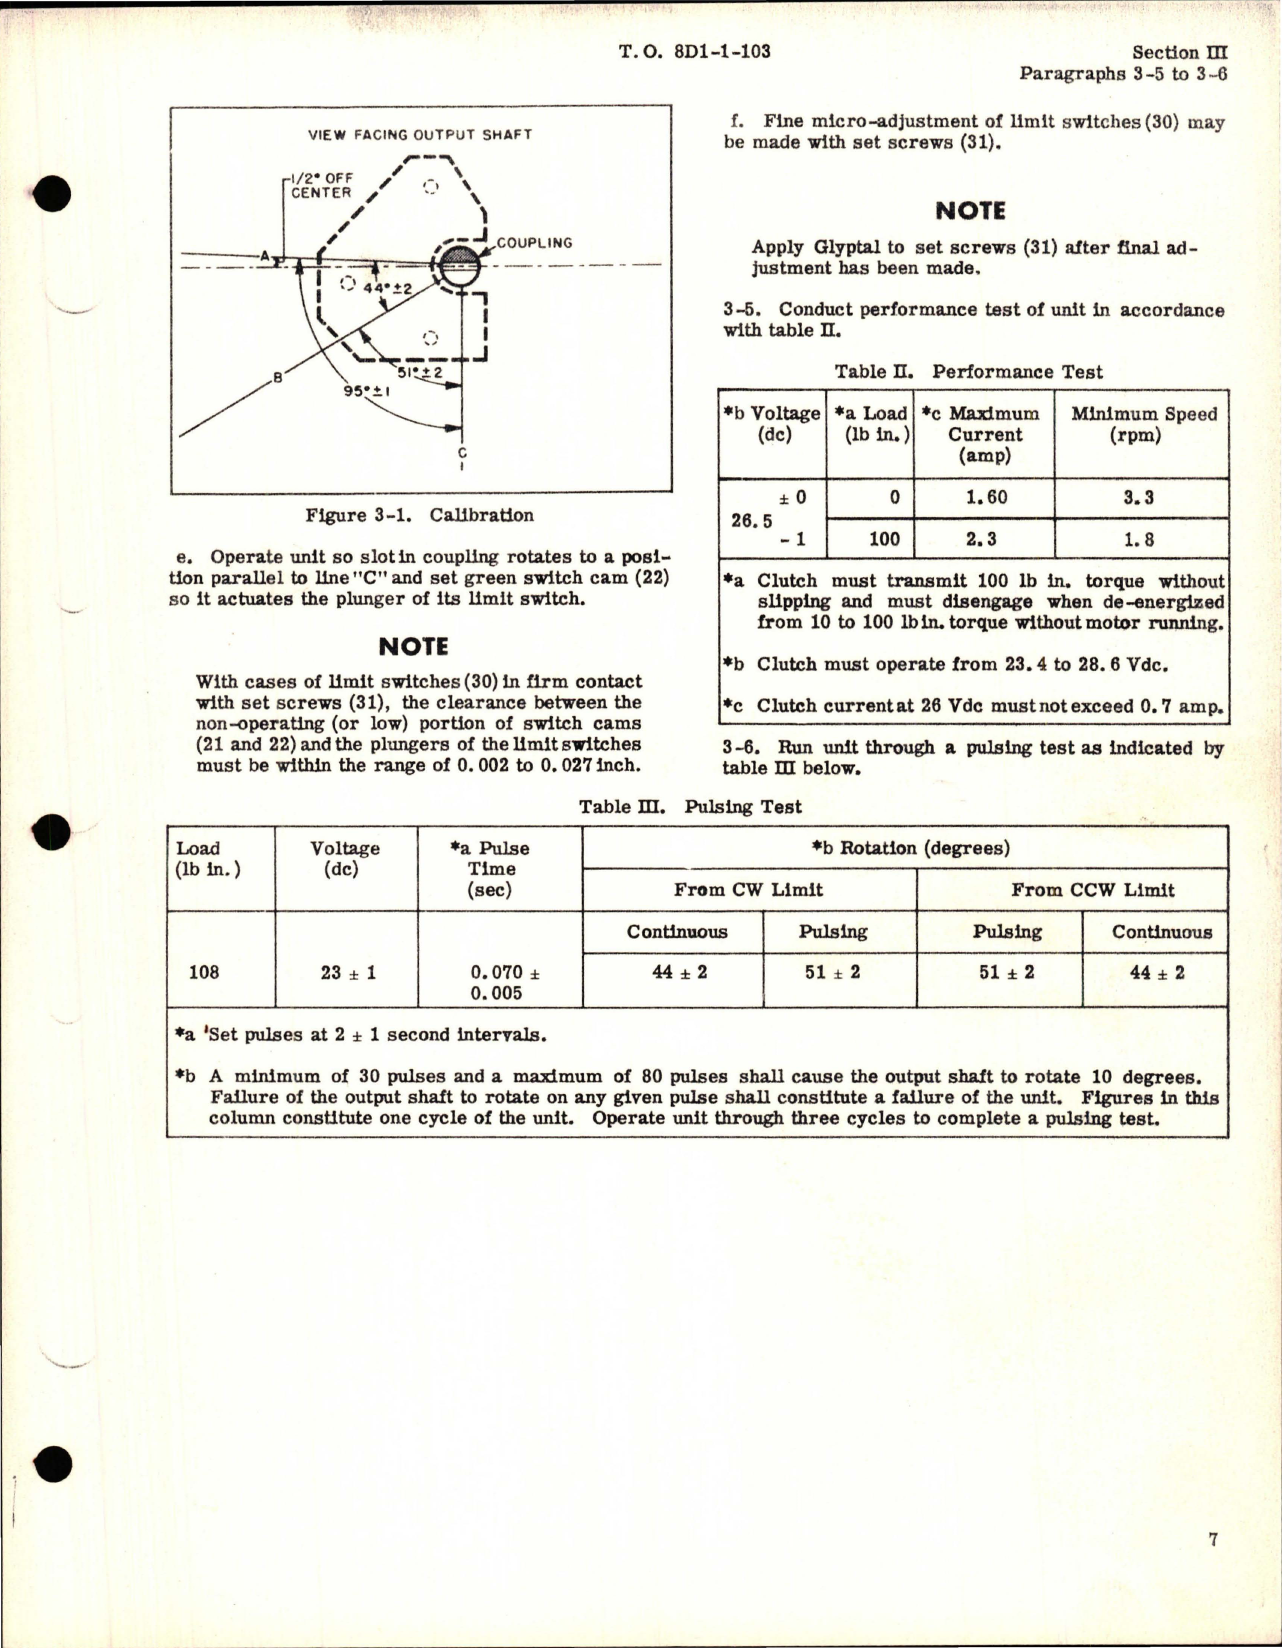 Sample page 9 from AirCorps Library document: Overhaul Instructions for Rotary Actuator 